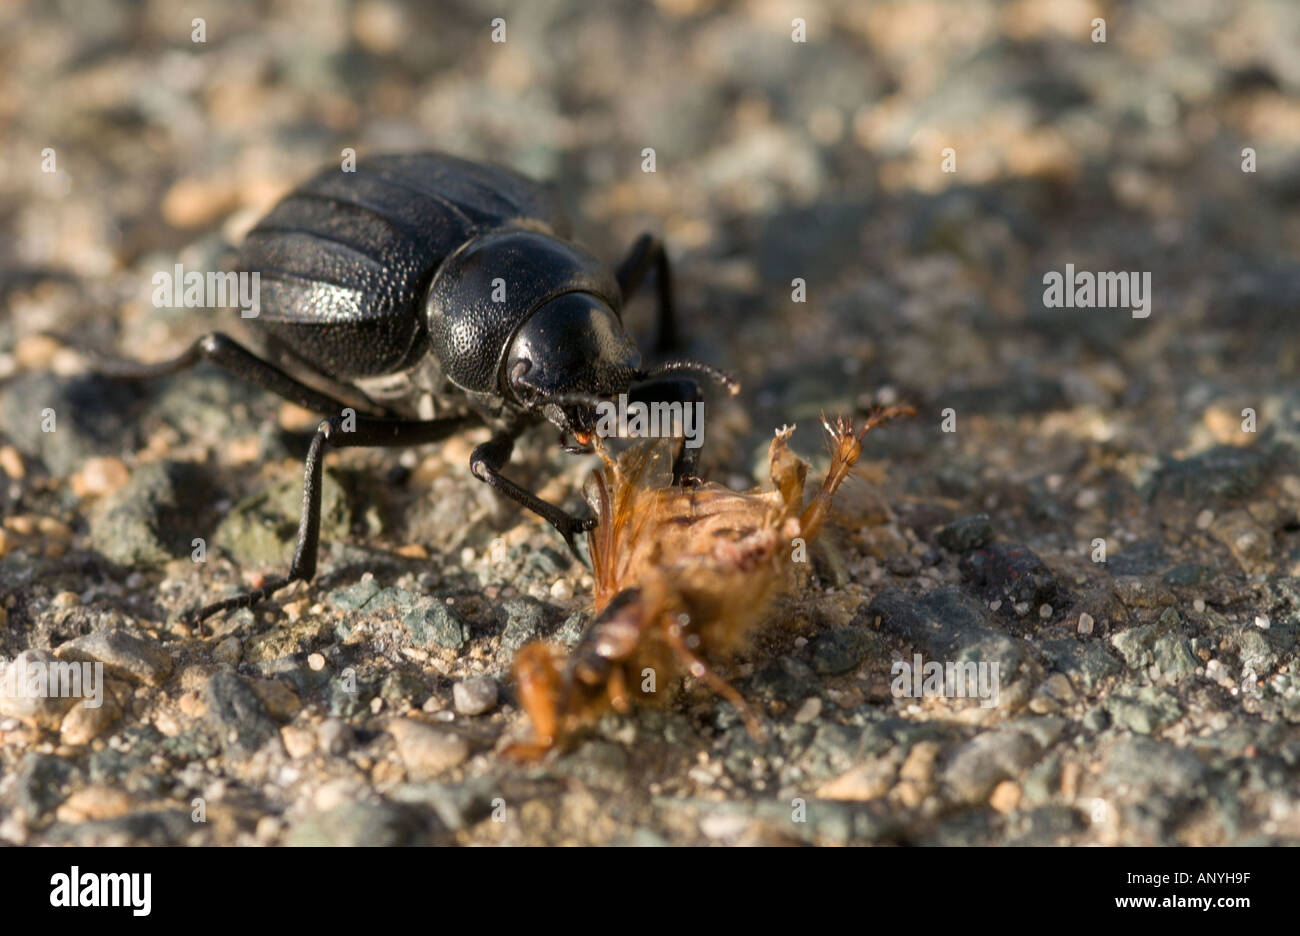 Black ground beetle from Carabidae family feeding on other insect's carrion, Doñana NP, Spain Stock Photo